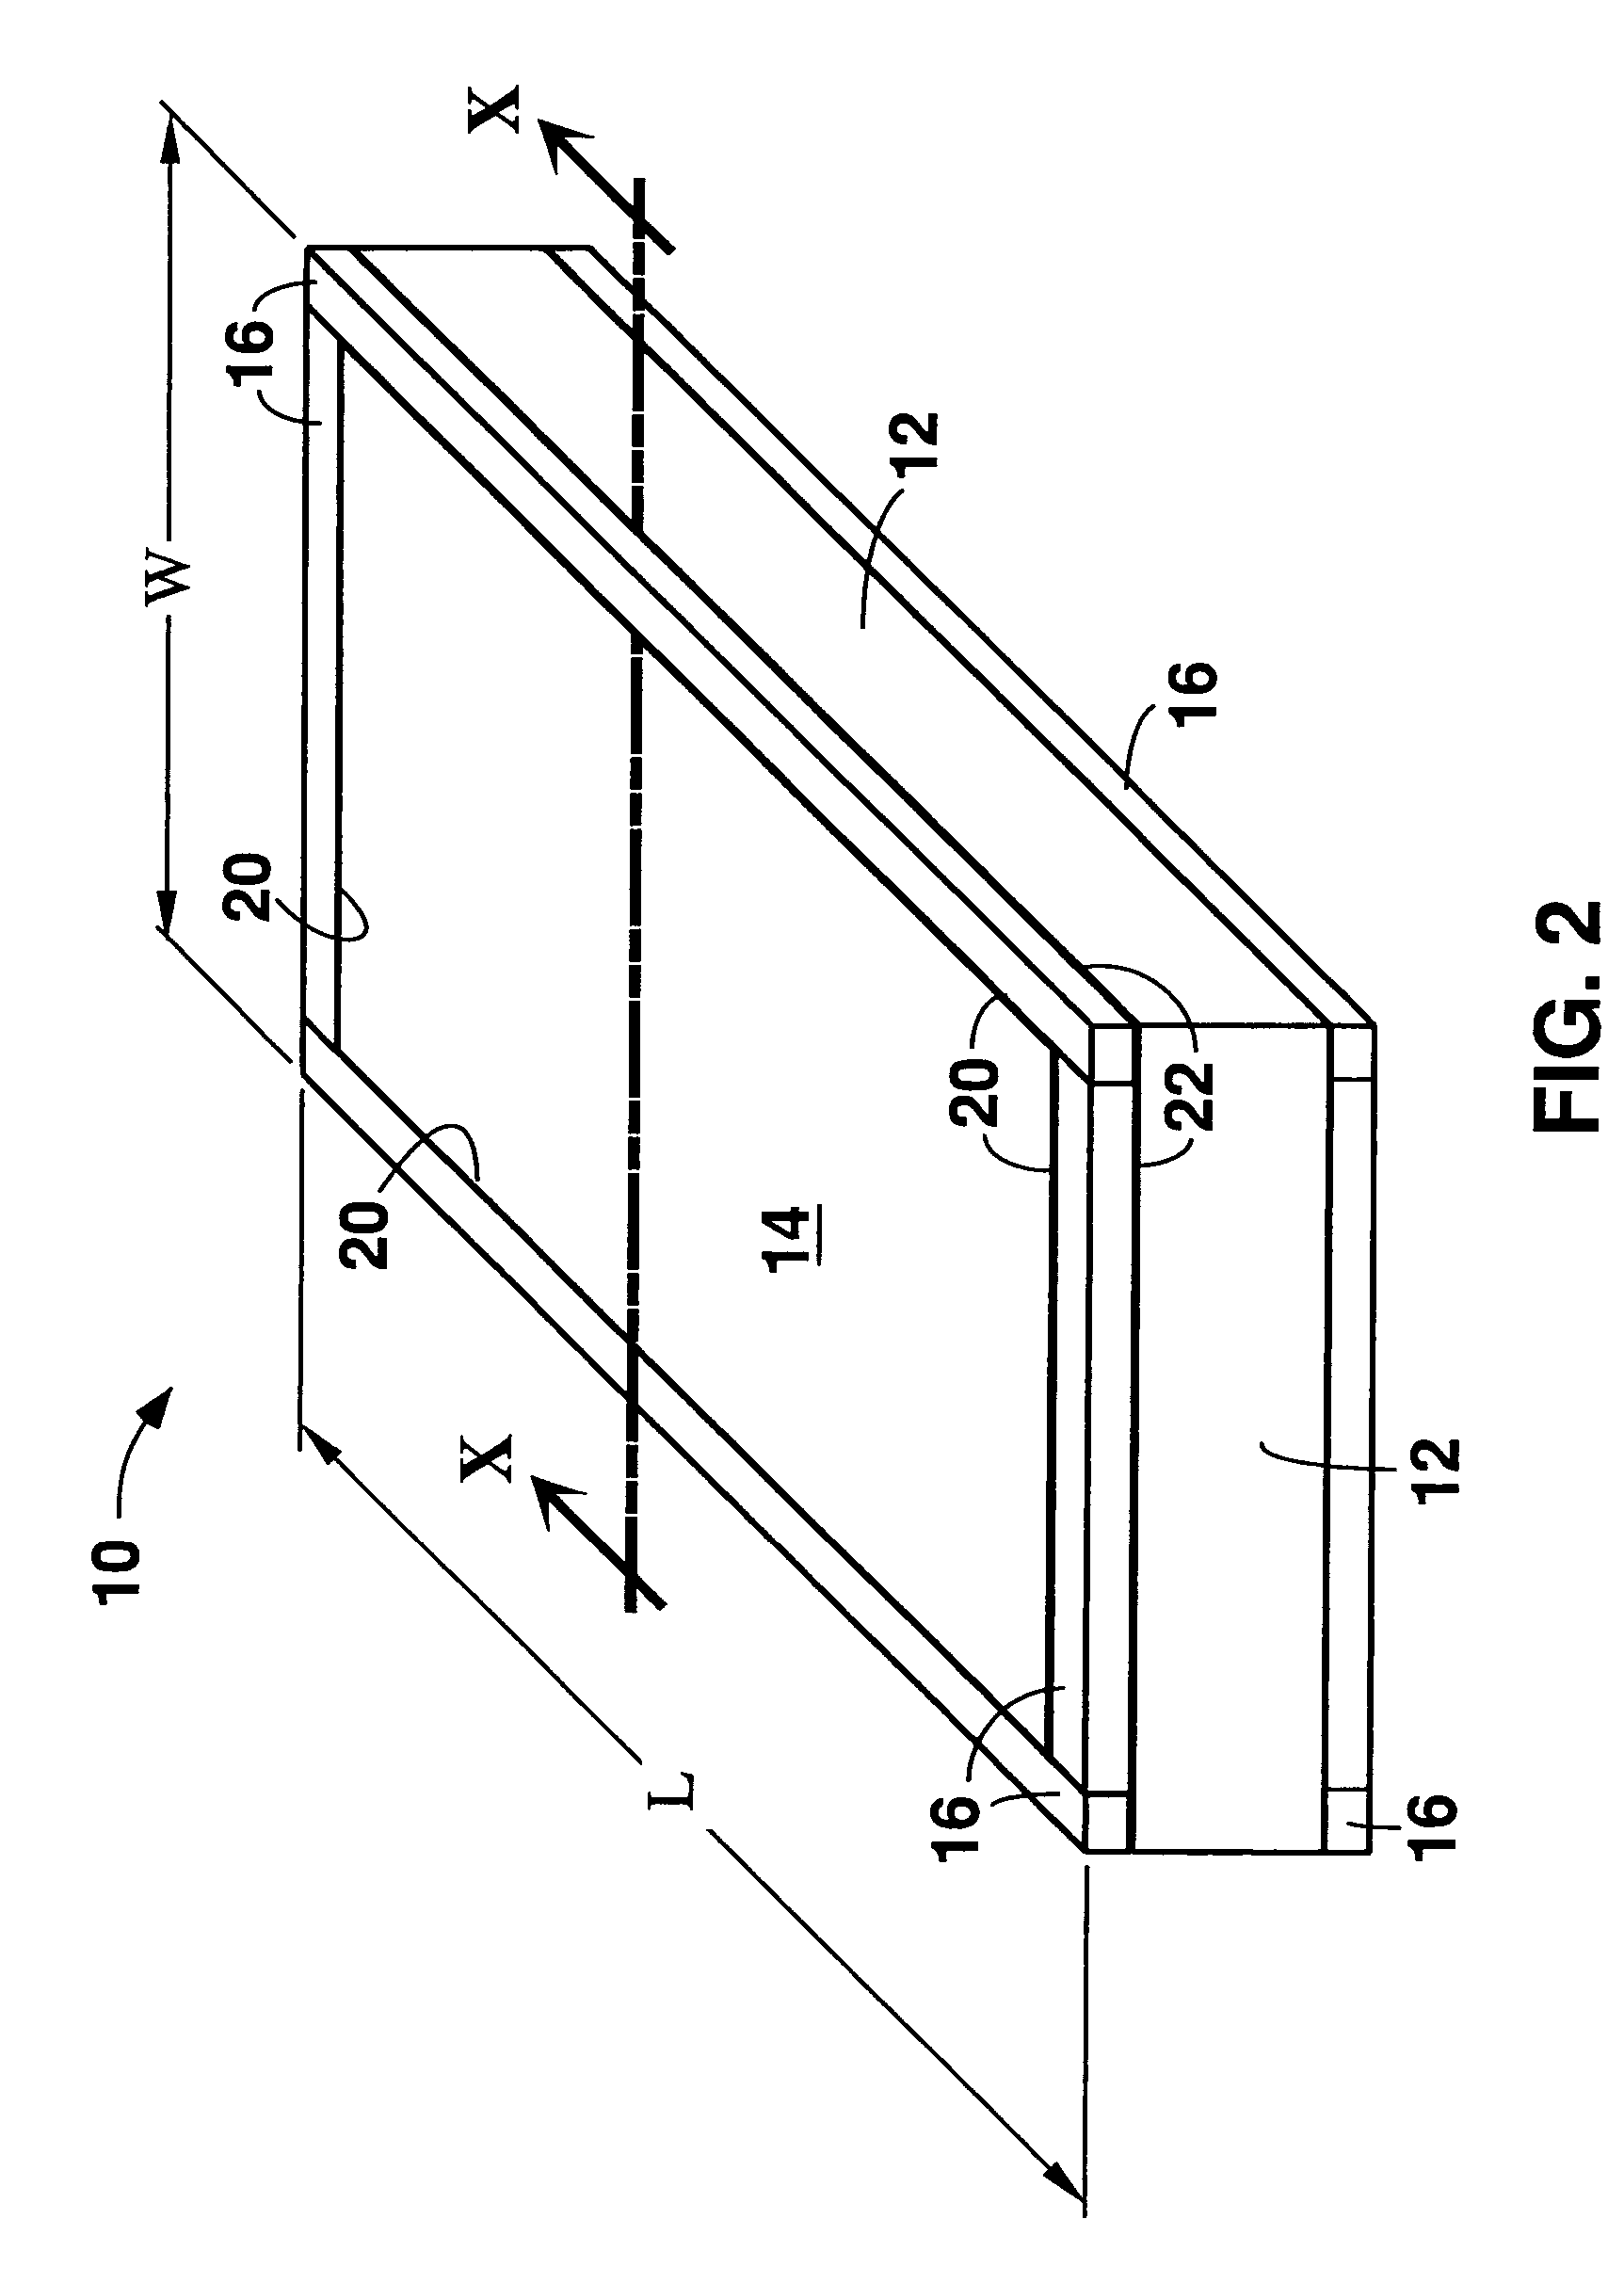 Clad alloy substrates and method for making same